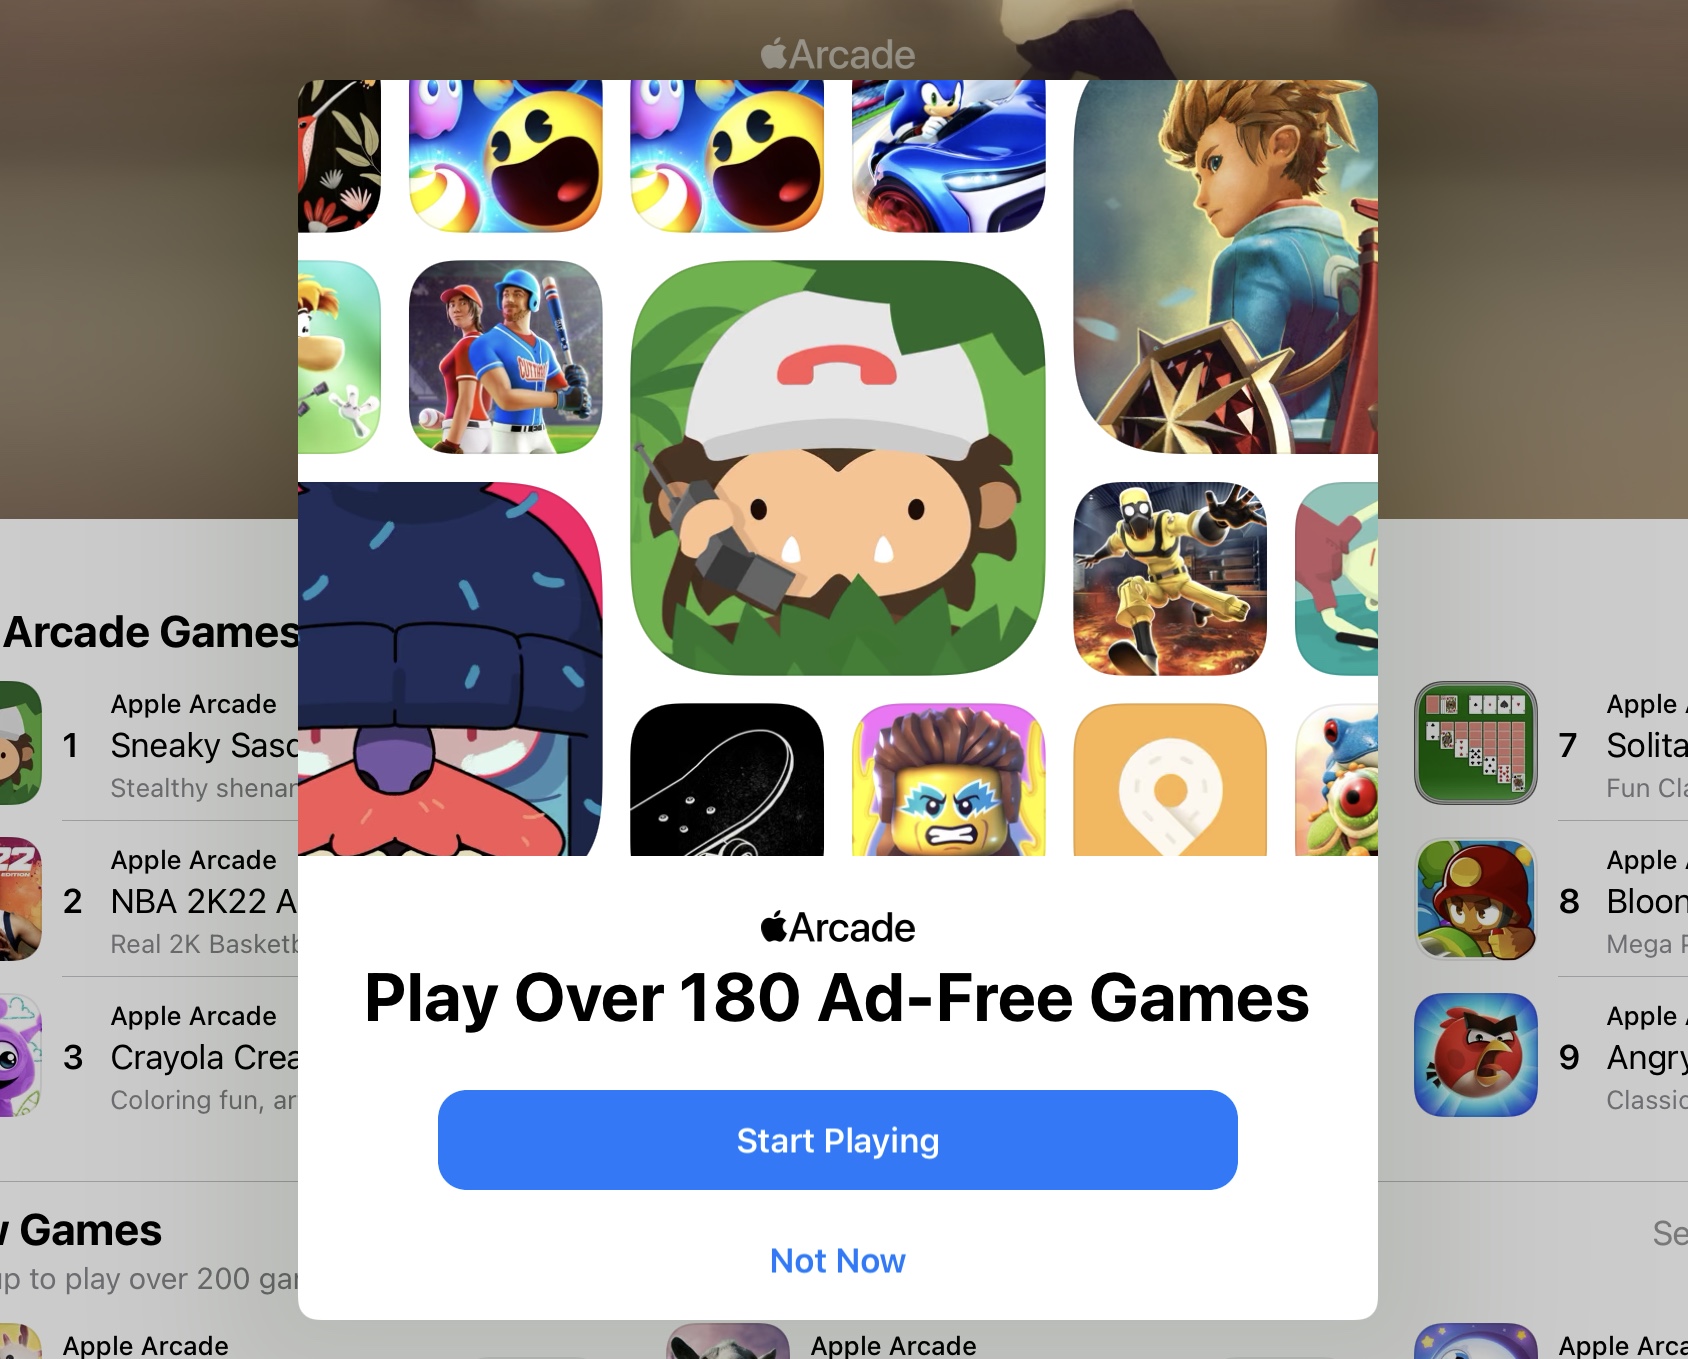 Why can't I download games anymore? - Apple Community